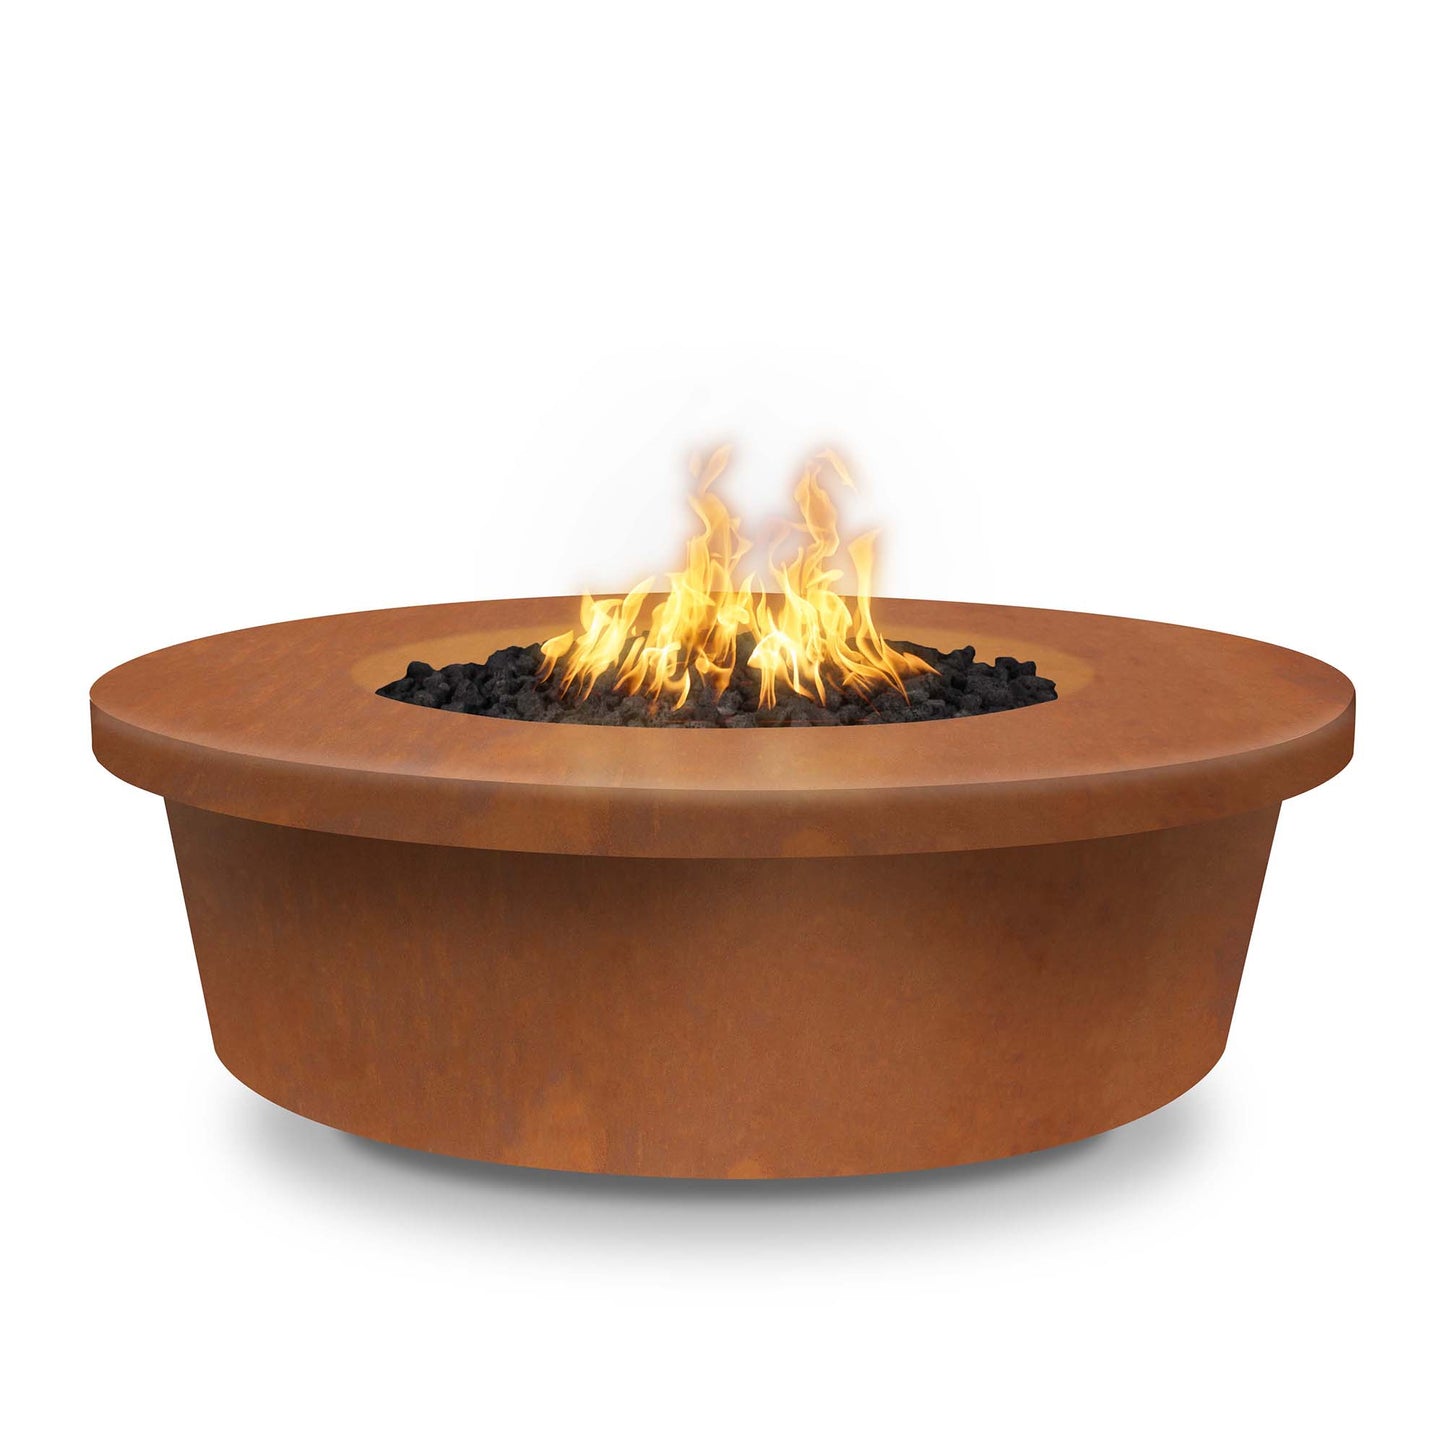 The Outdoor Plus Round Tempe 48" Corten Steel Natural Gas Fire Pit with 12V Electronic Ignition